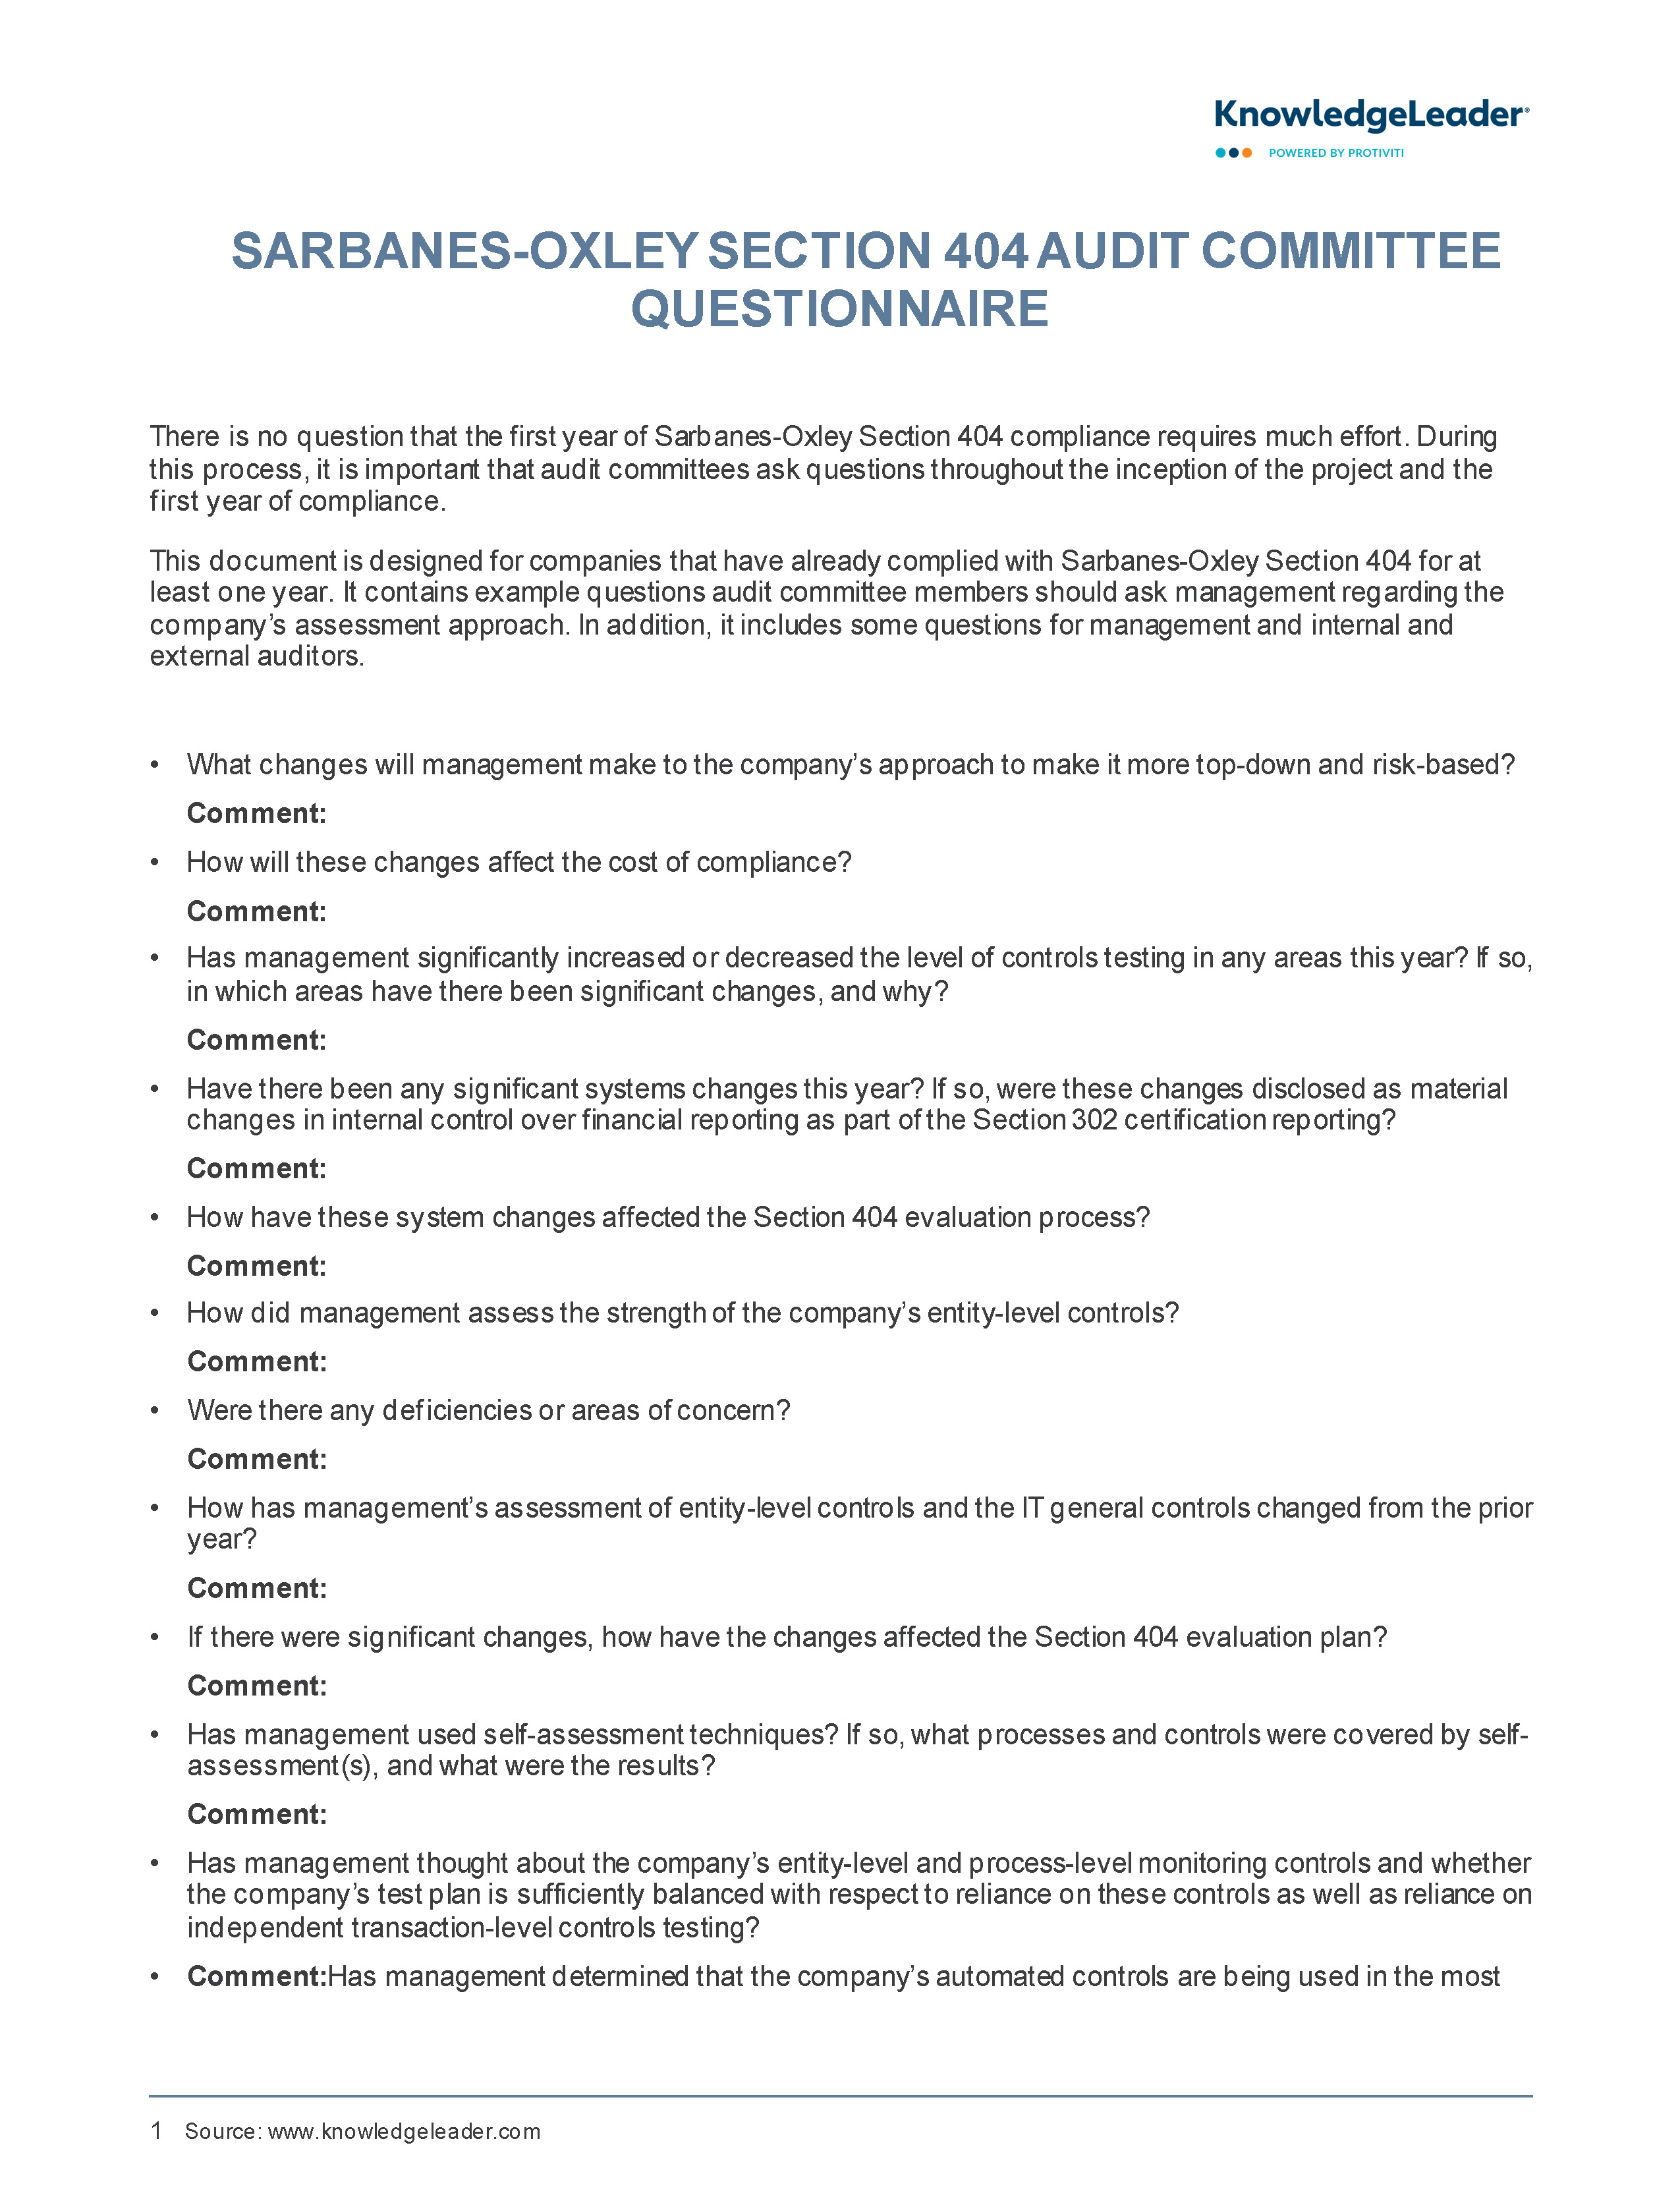 Screenshot of the first page of Sarbanes-Oxley Section 404 Audit Committee Questionnaire